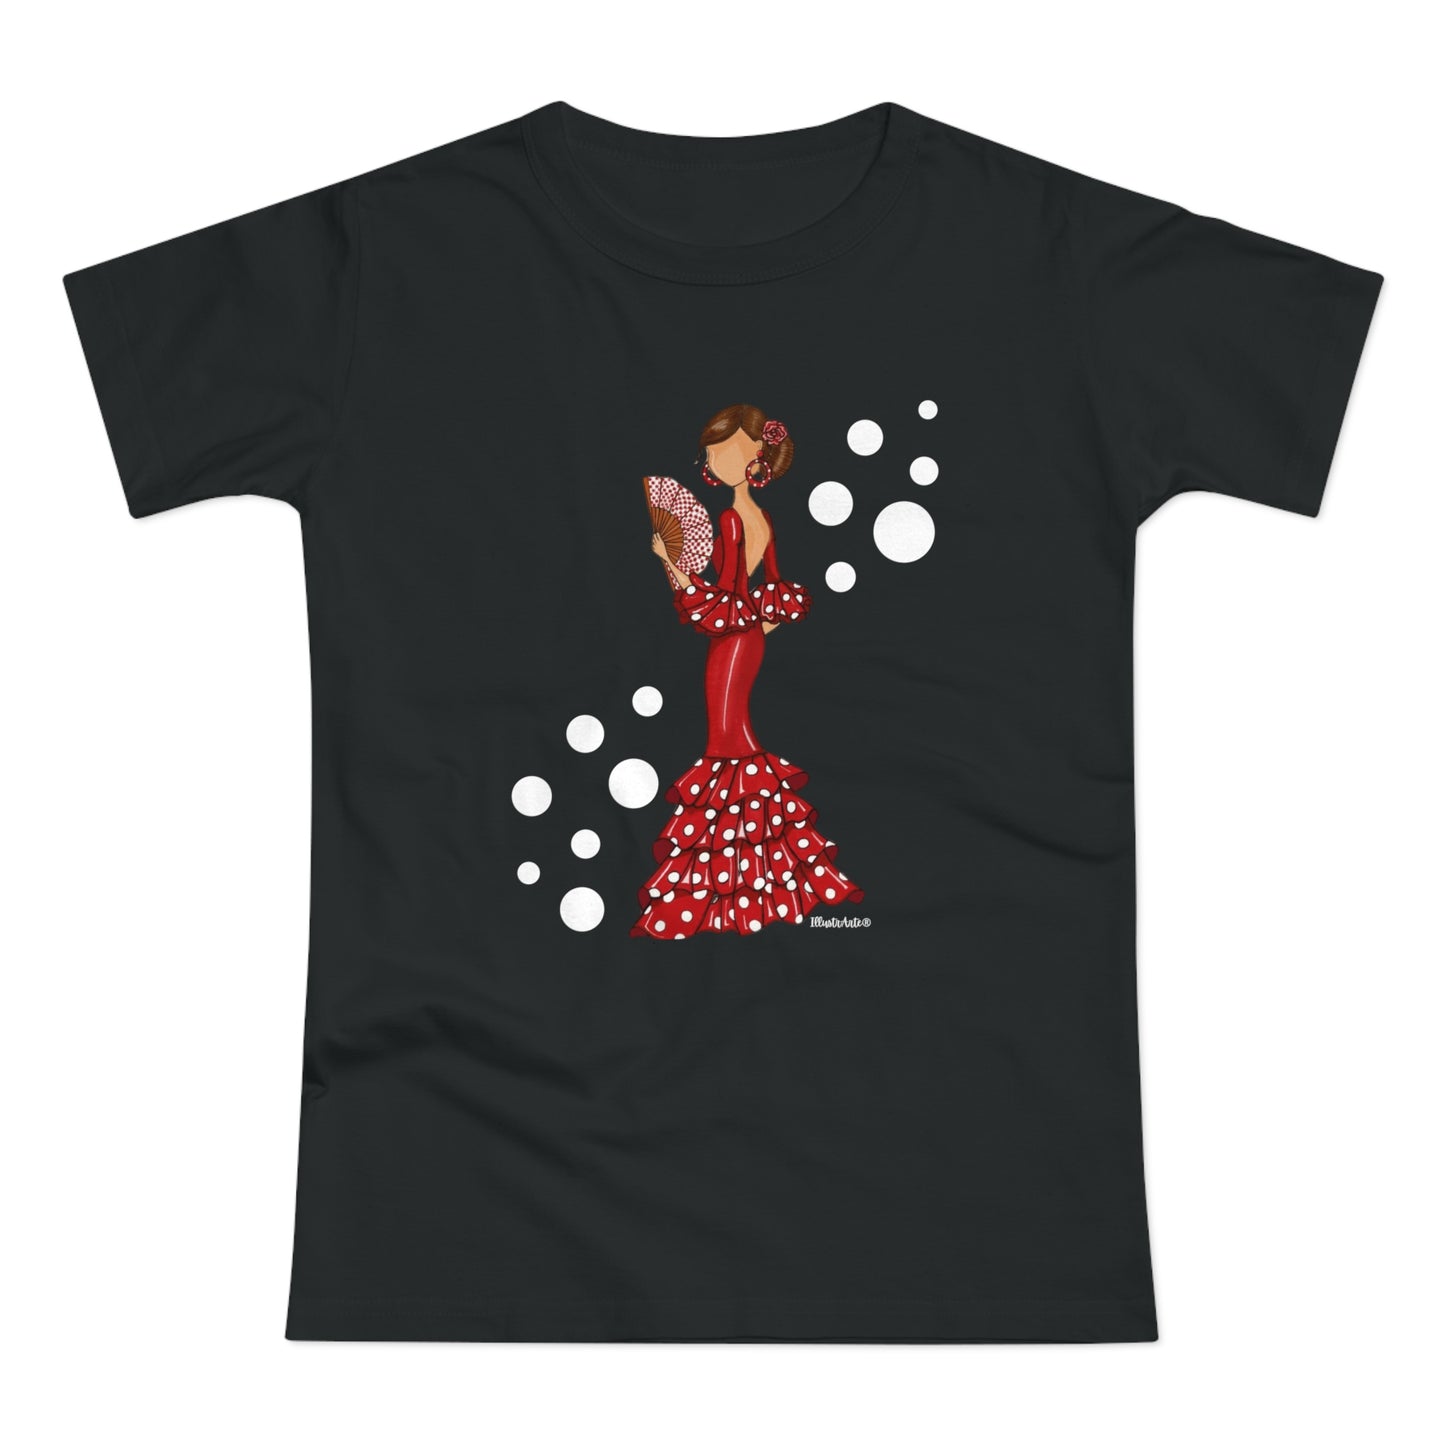 a black t - shirt with a woman in a polka dot dress